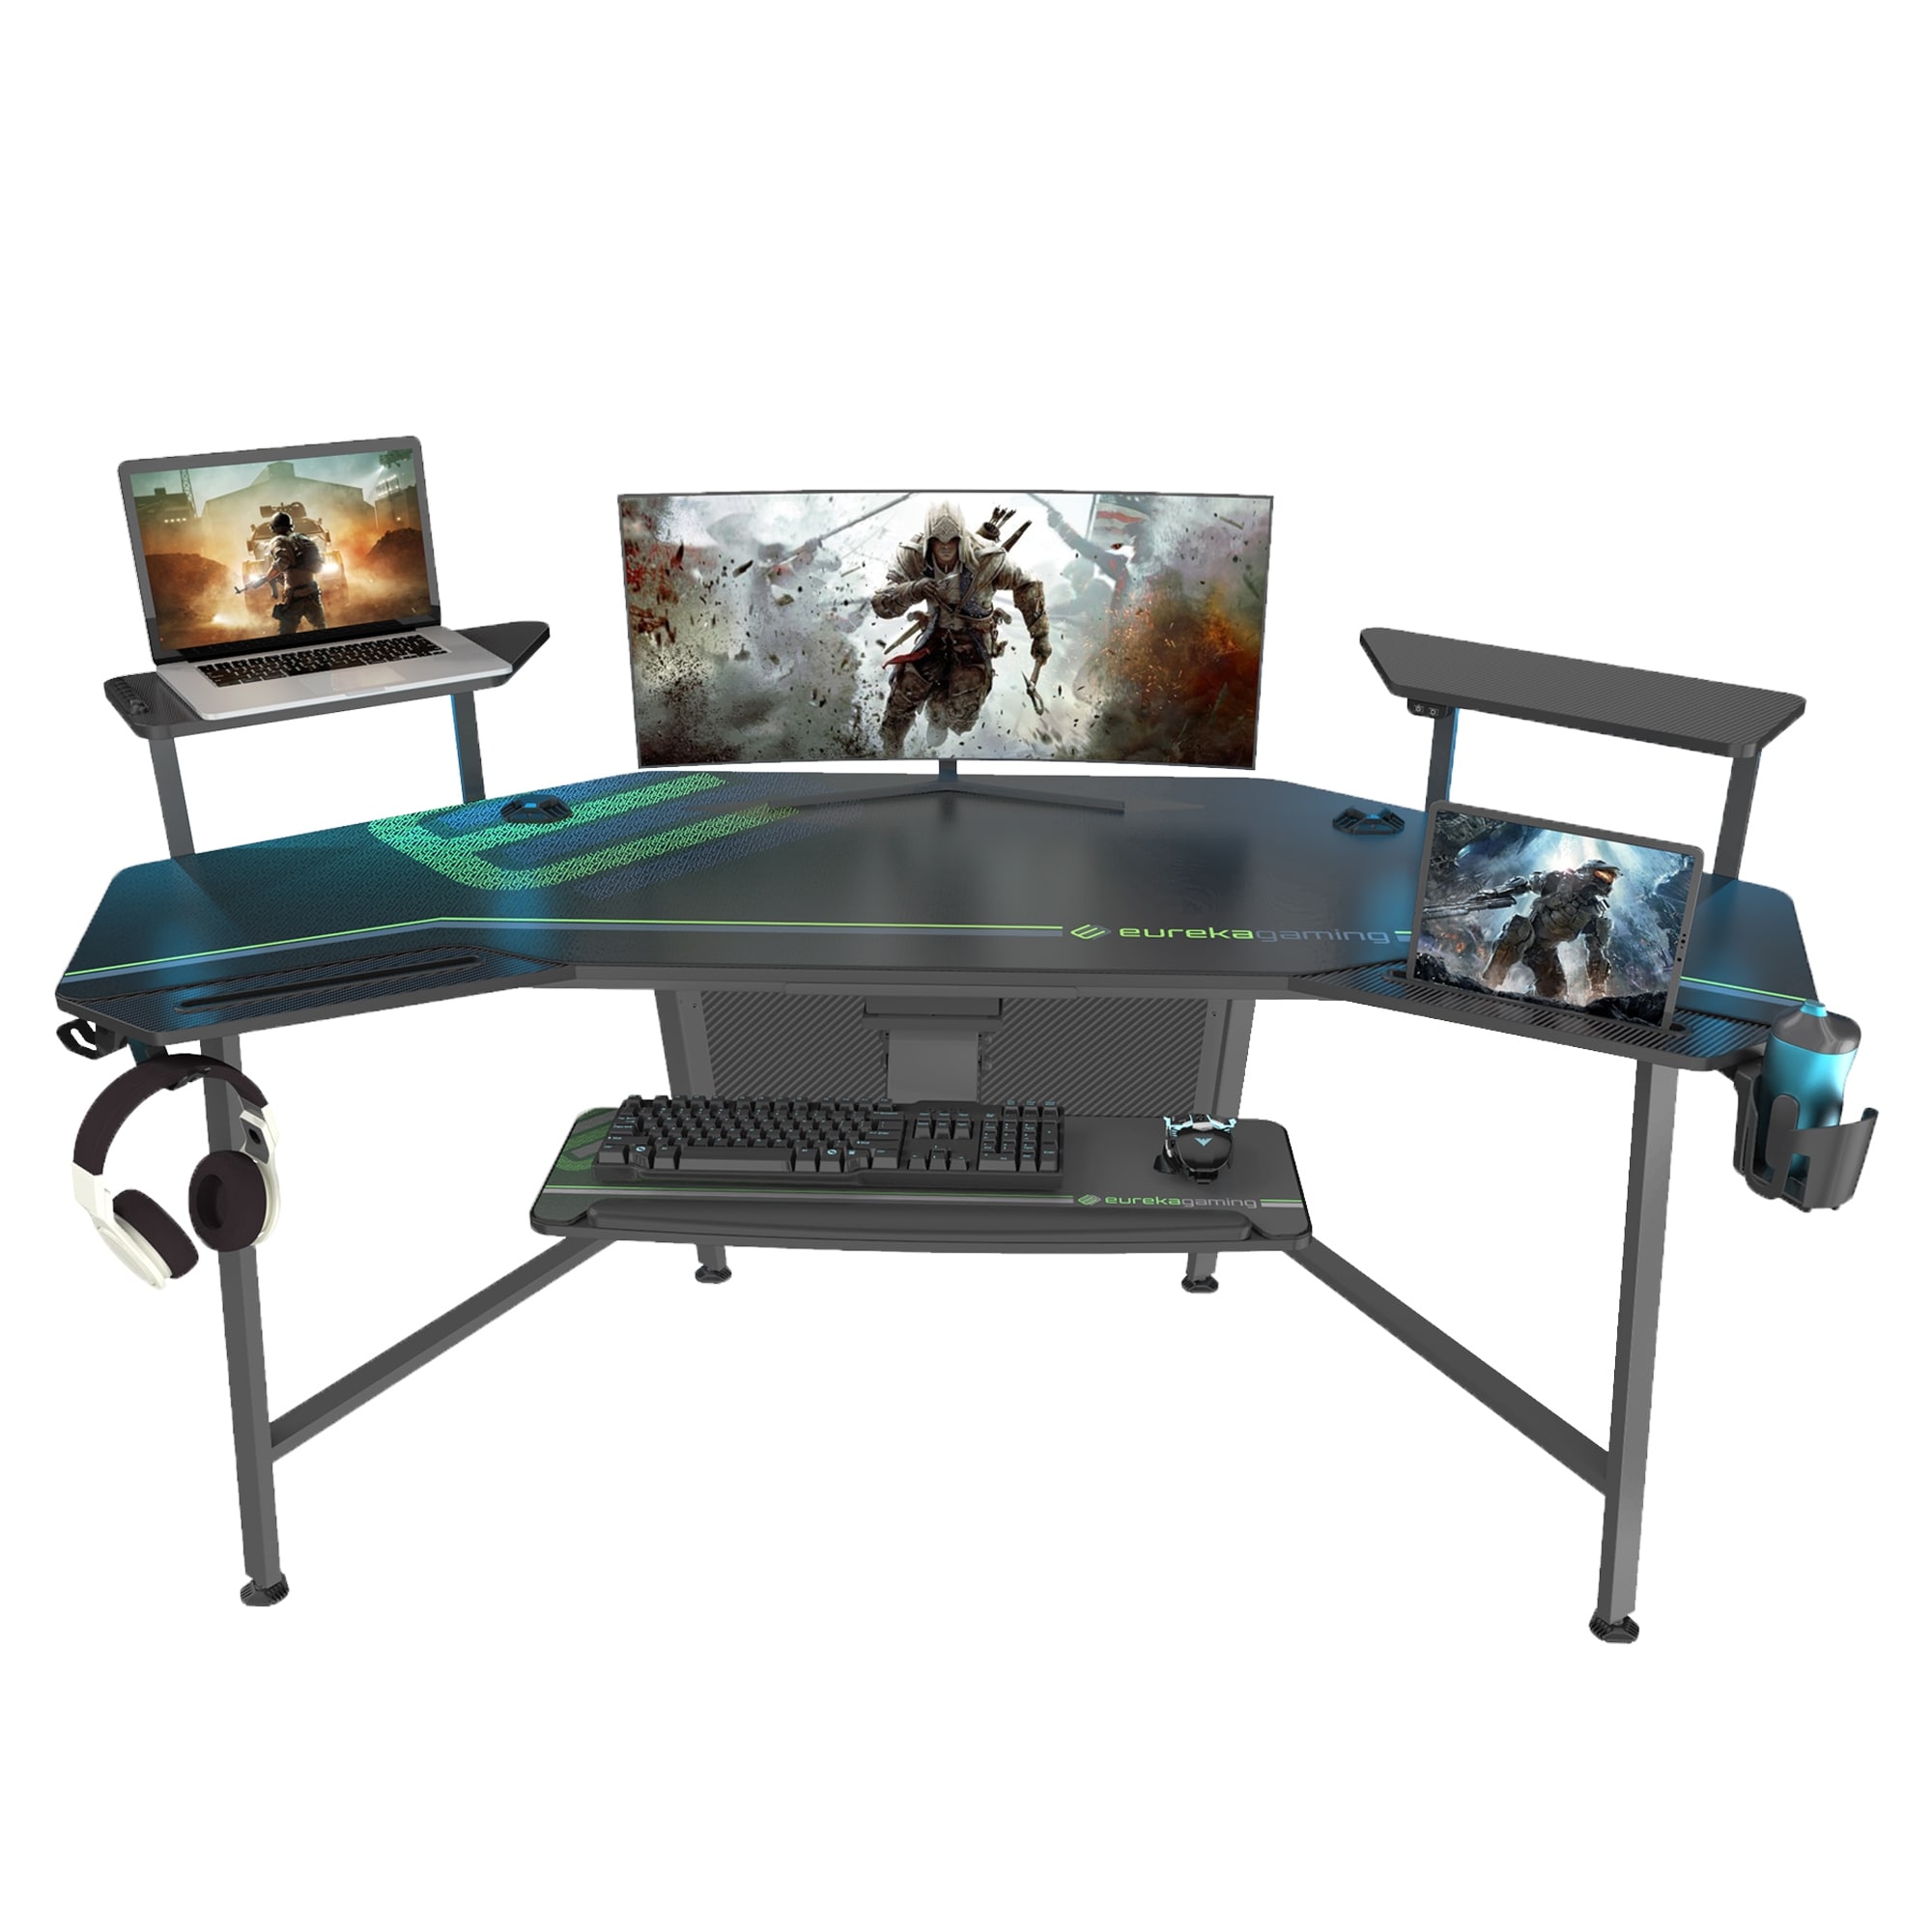 https://ak1.ostkcdn.com/images/products/is/images/direct/cafd6b2801d7c95249ebde9f8ee55d3aeb36c794/Eureka-72%22-Large-Gaming-Desk-Multifunctional-Computer-Desk-with-Shelf-%26-Keyboard-Tray-Black.jpg